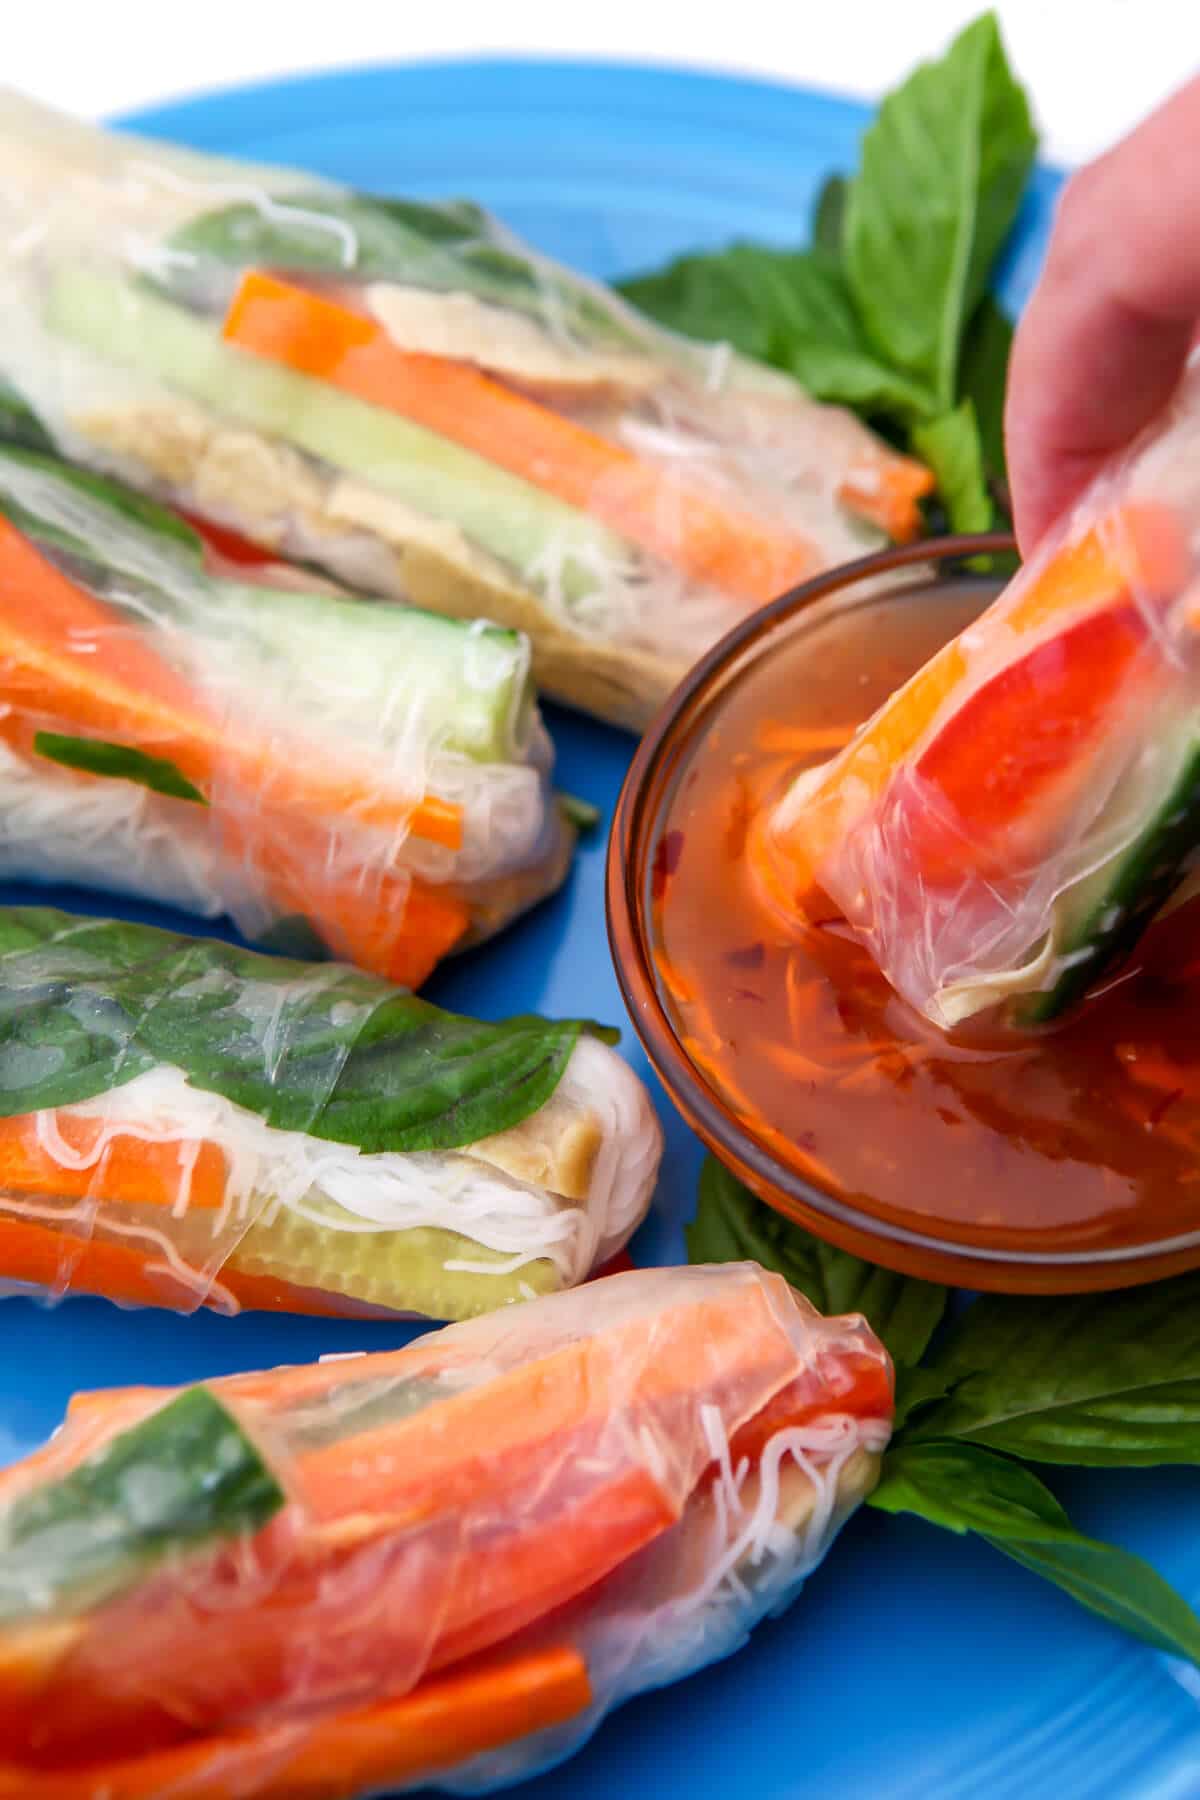 A tofu spring roll being dipped into sweet chili sauce.